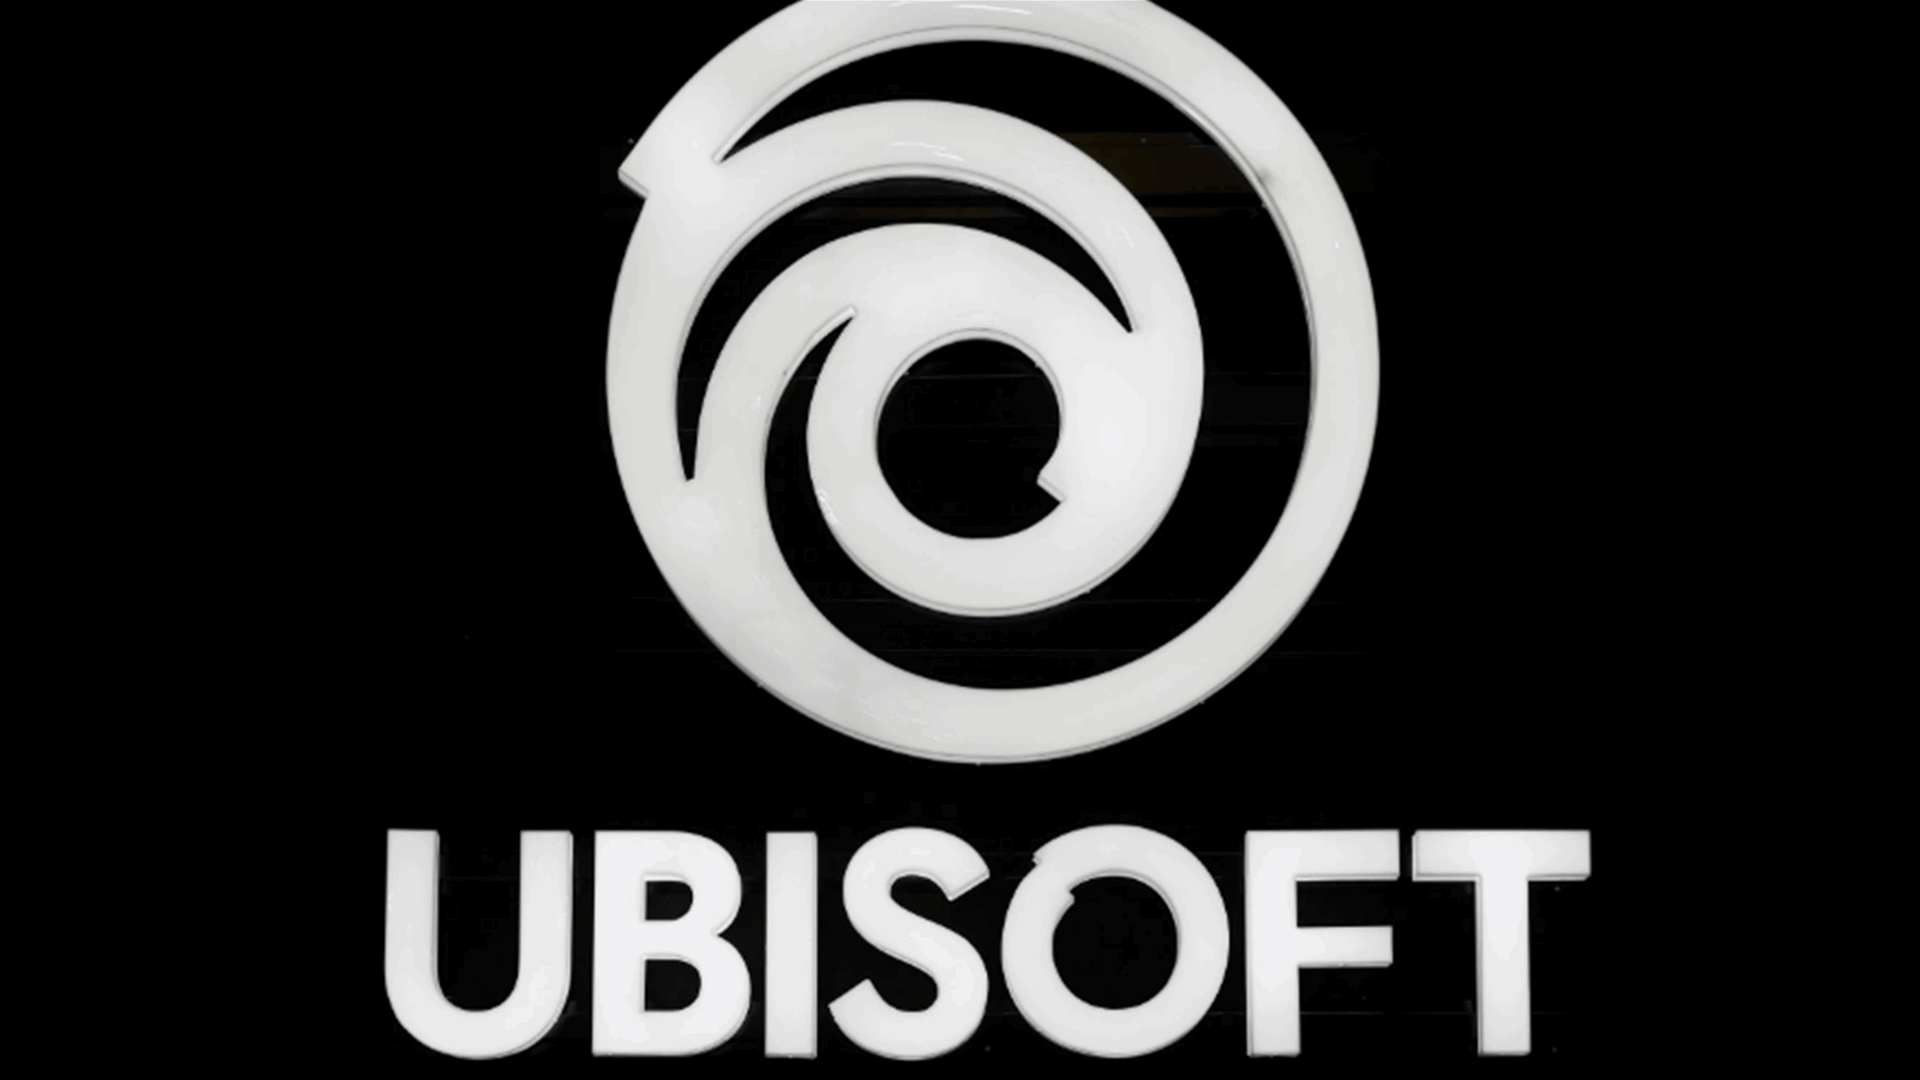 Ubisoft’s new AI tool automatically generates dialogue for non-playable game characters